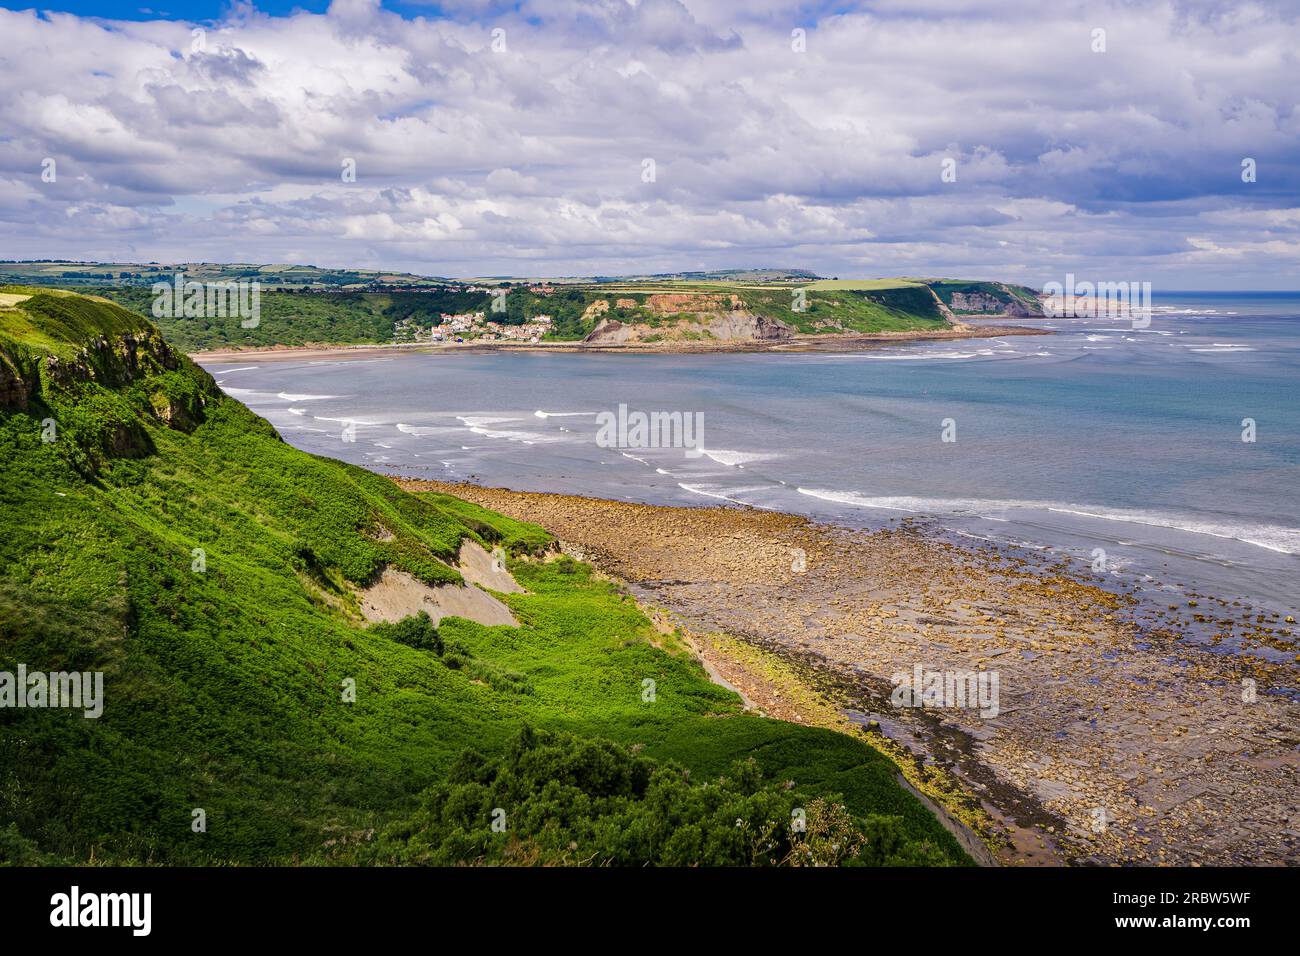 View of Runswick Bay from the clifftop at Kettleness. This is on the path which runs between Runswick Bay and Kettleness in North Yorkshire. Stock Photo